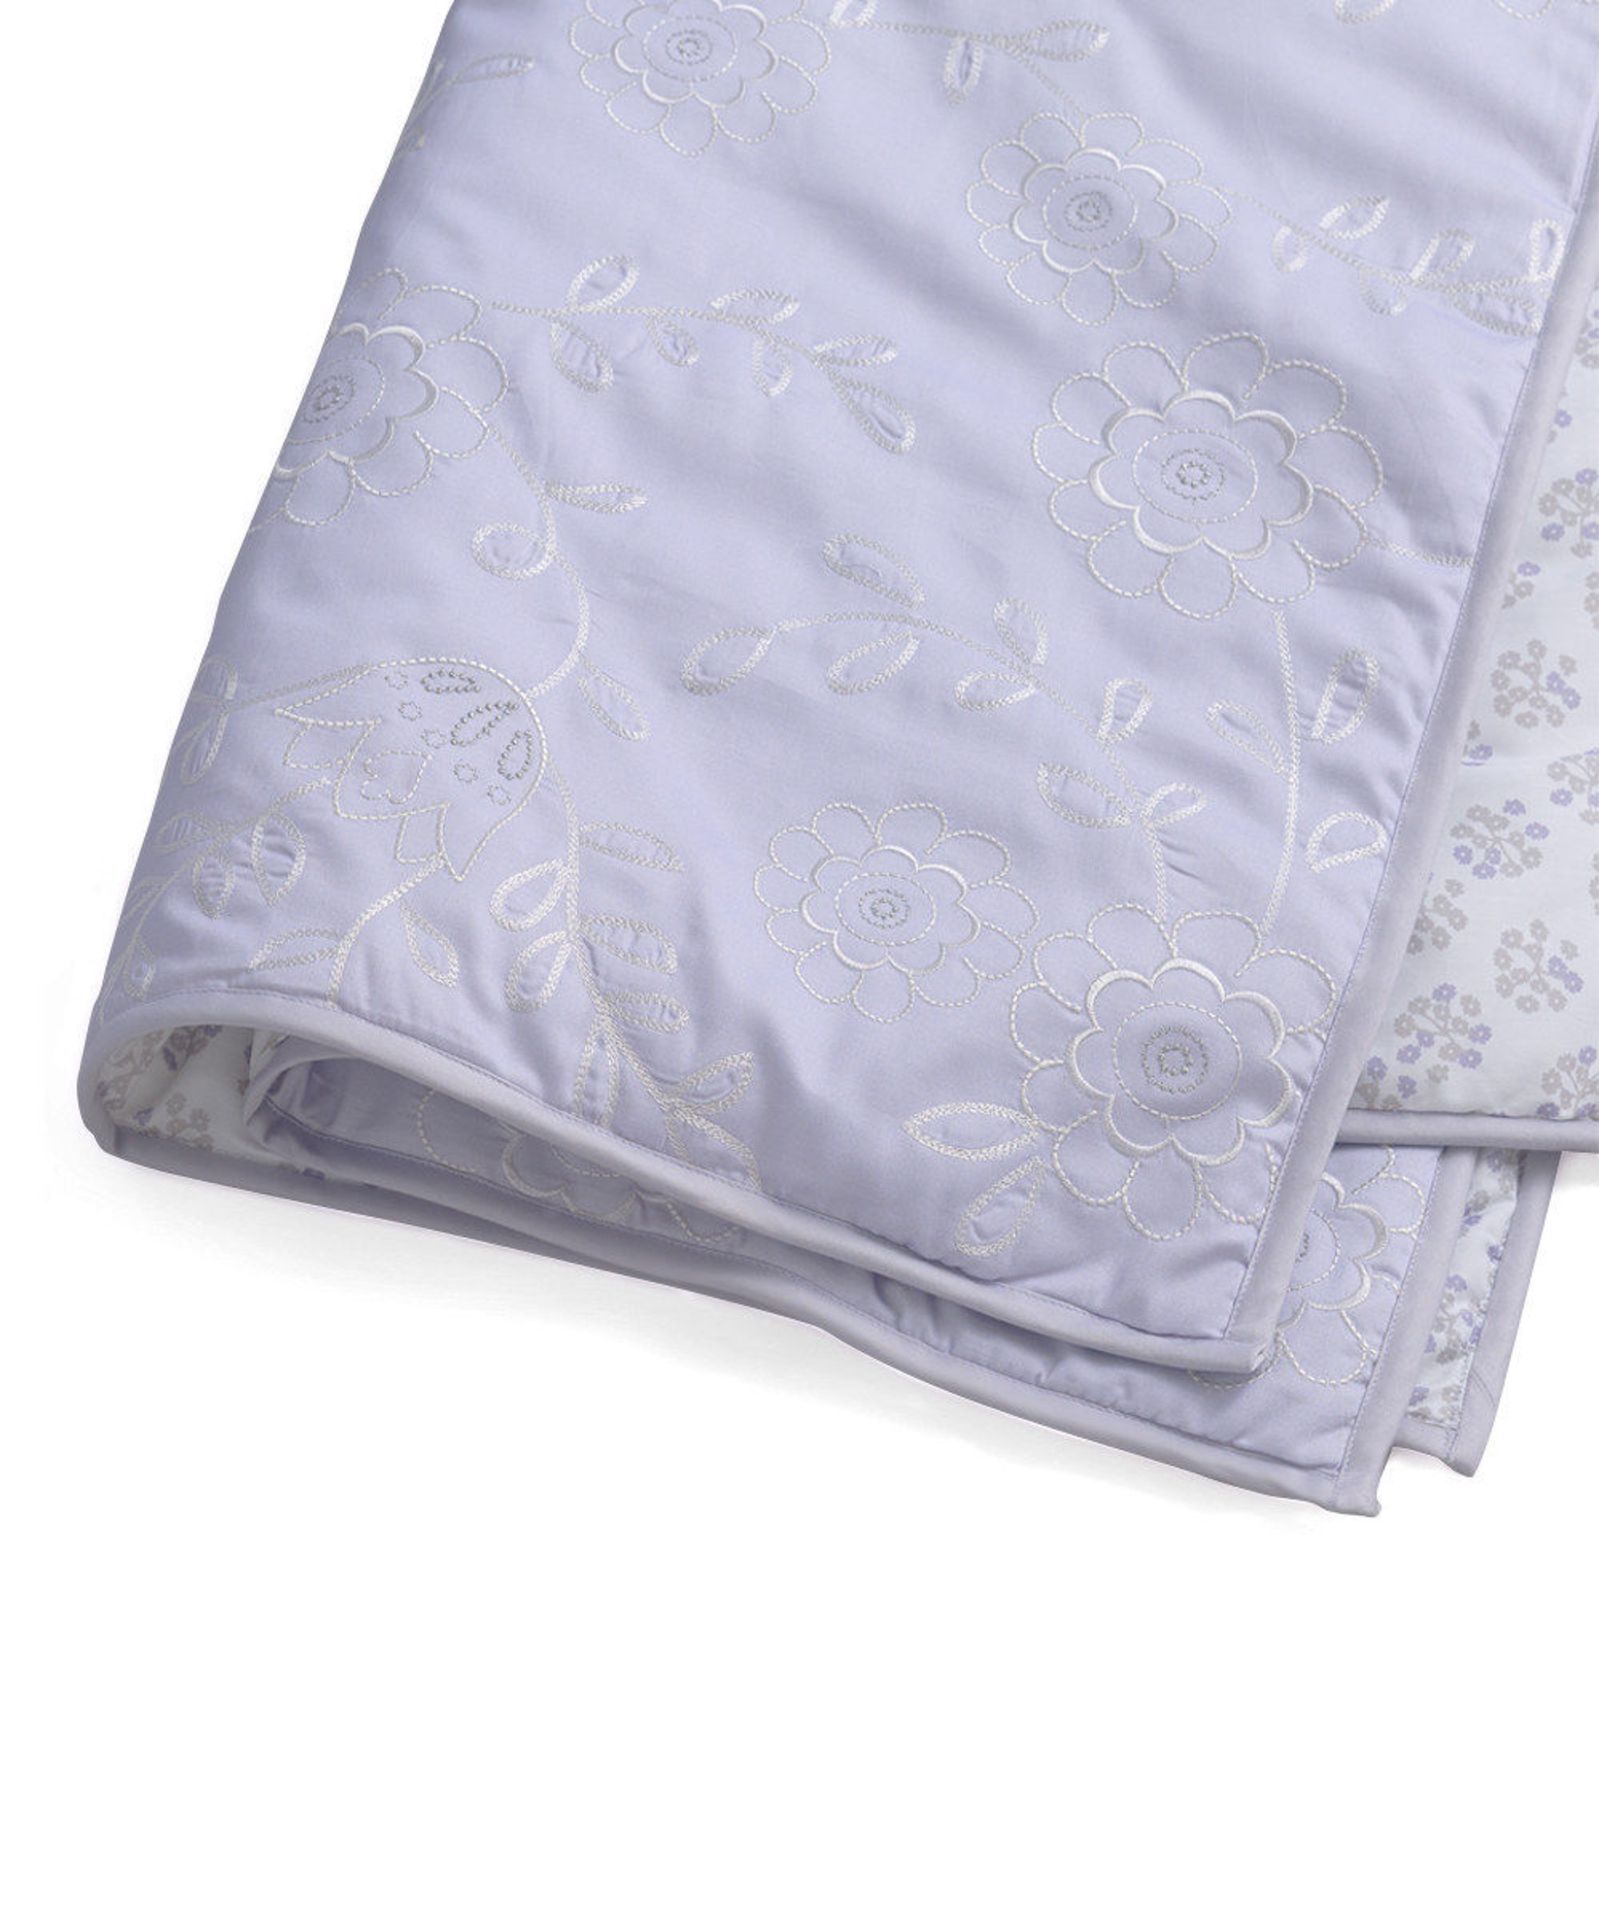 Brand New Lambs & Ivy French Lavender Four-Piece Bedding Set (Ref: 42618943 SHELF 1) - Image 3 of 4